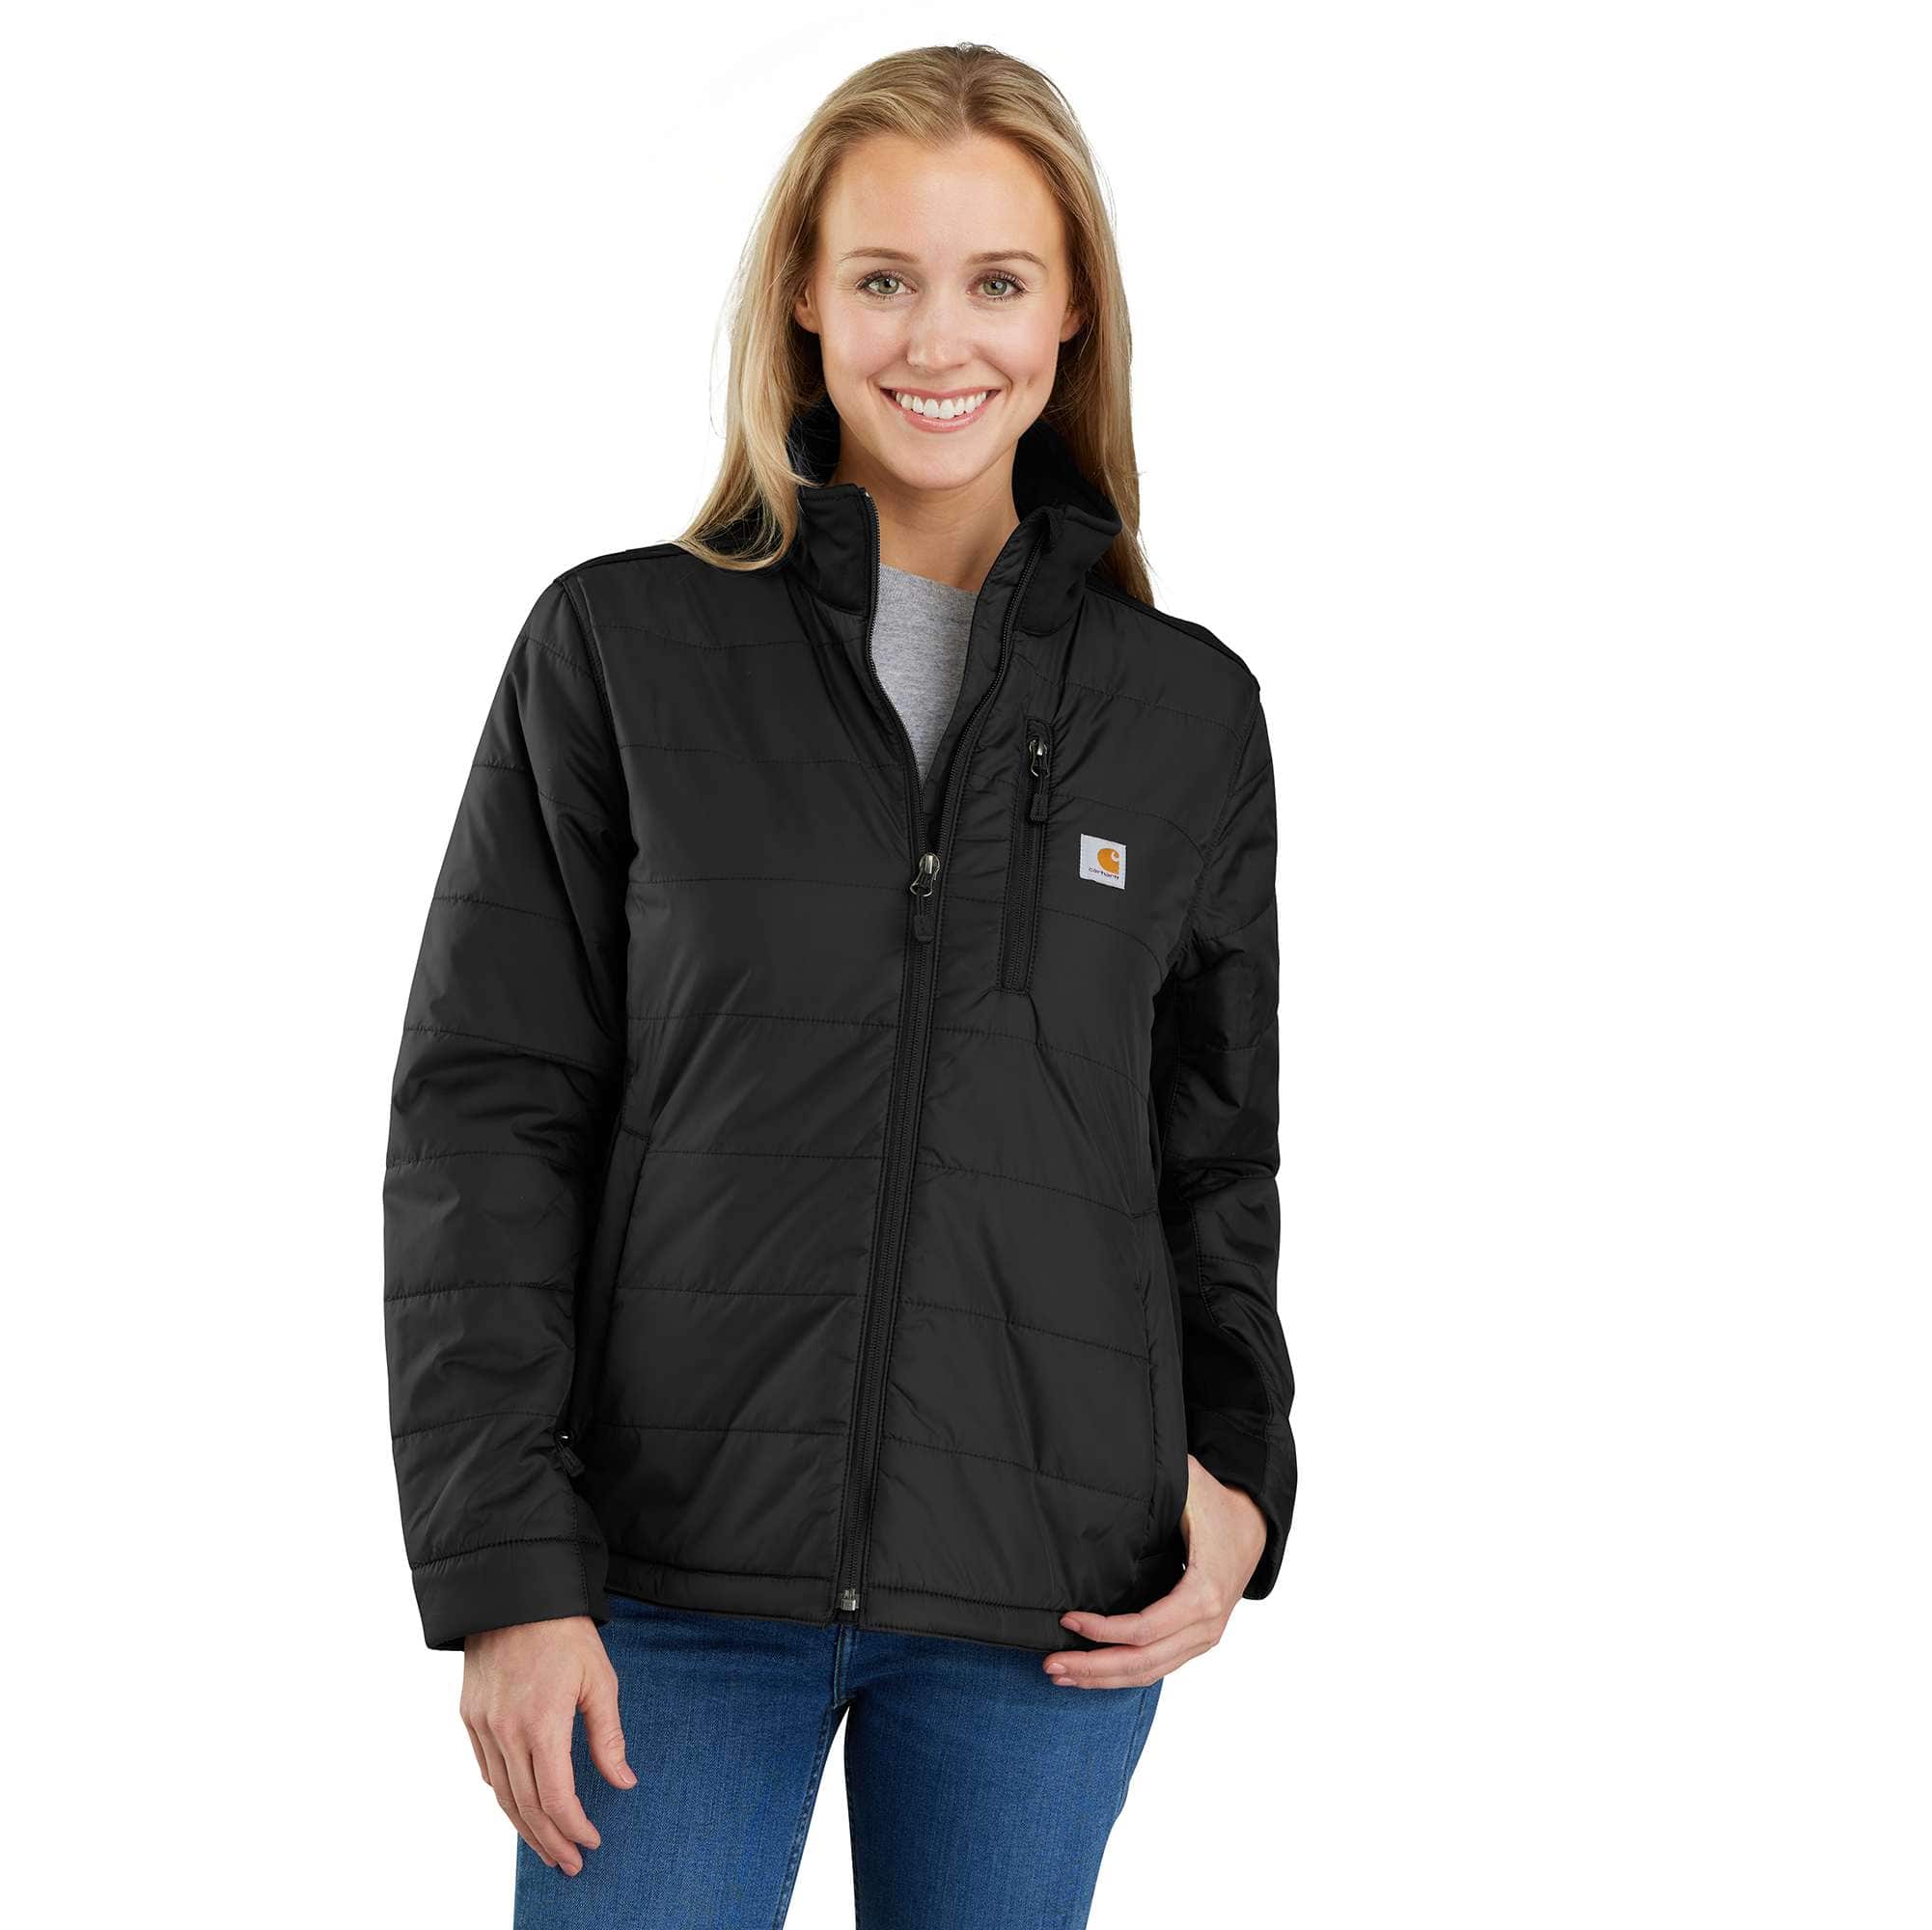 Women's Lightweight Puffer Jacket - Relaxed Fit Insulated 2 Warmer Rating